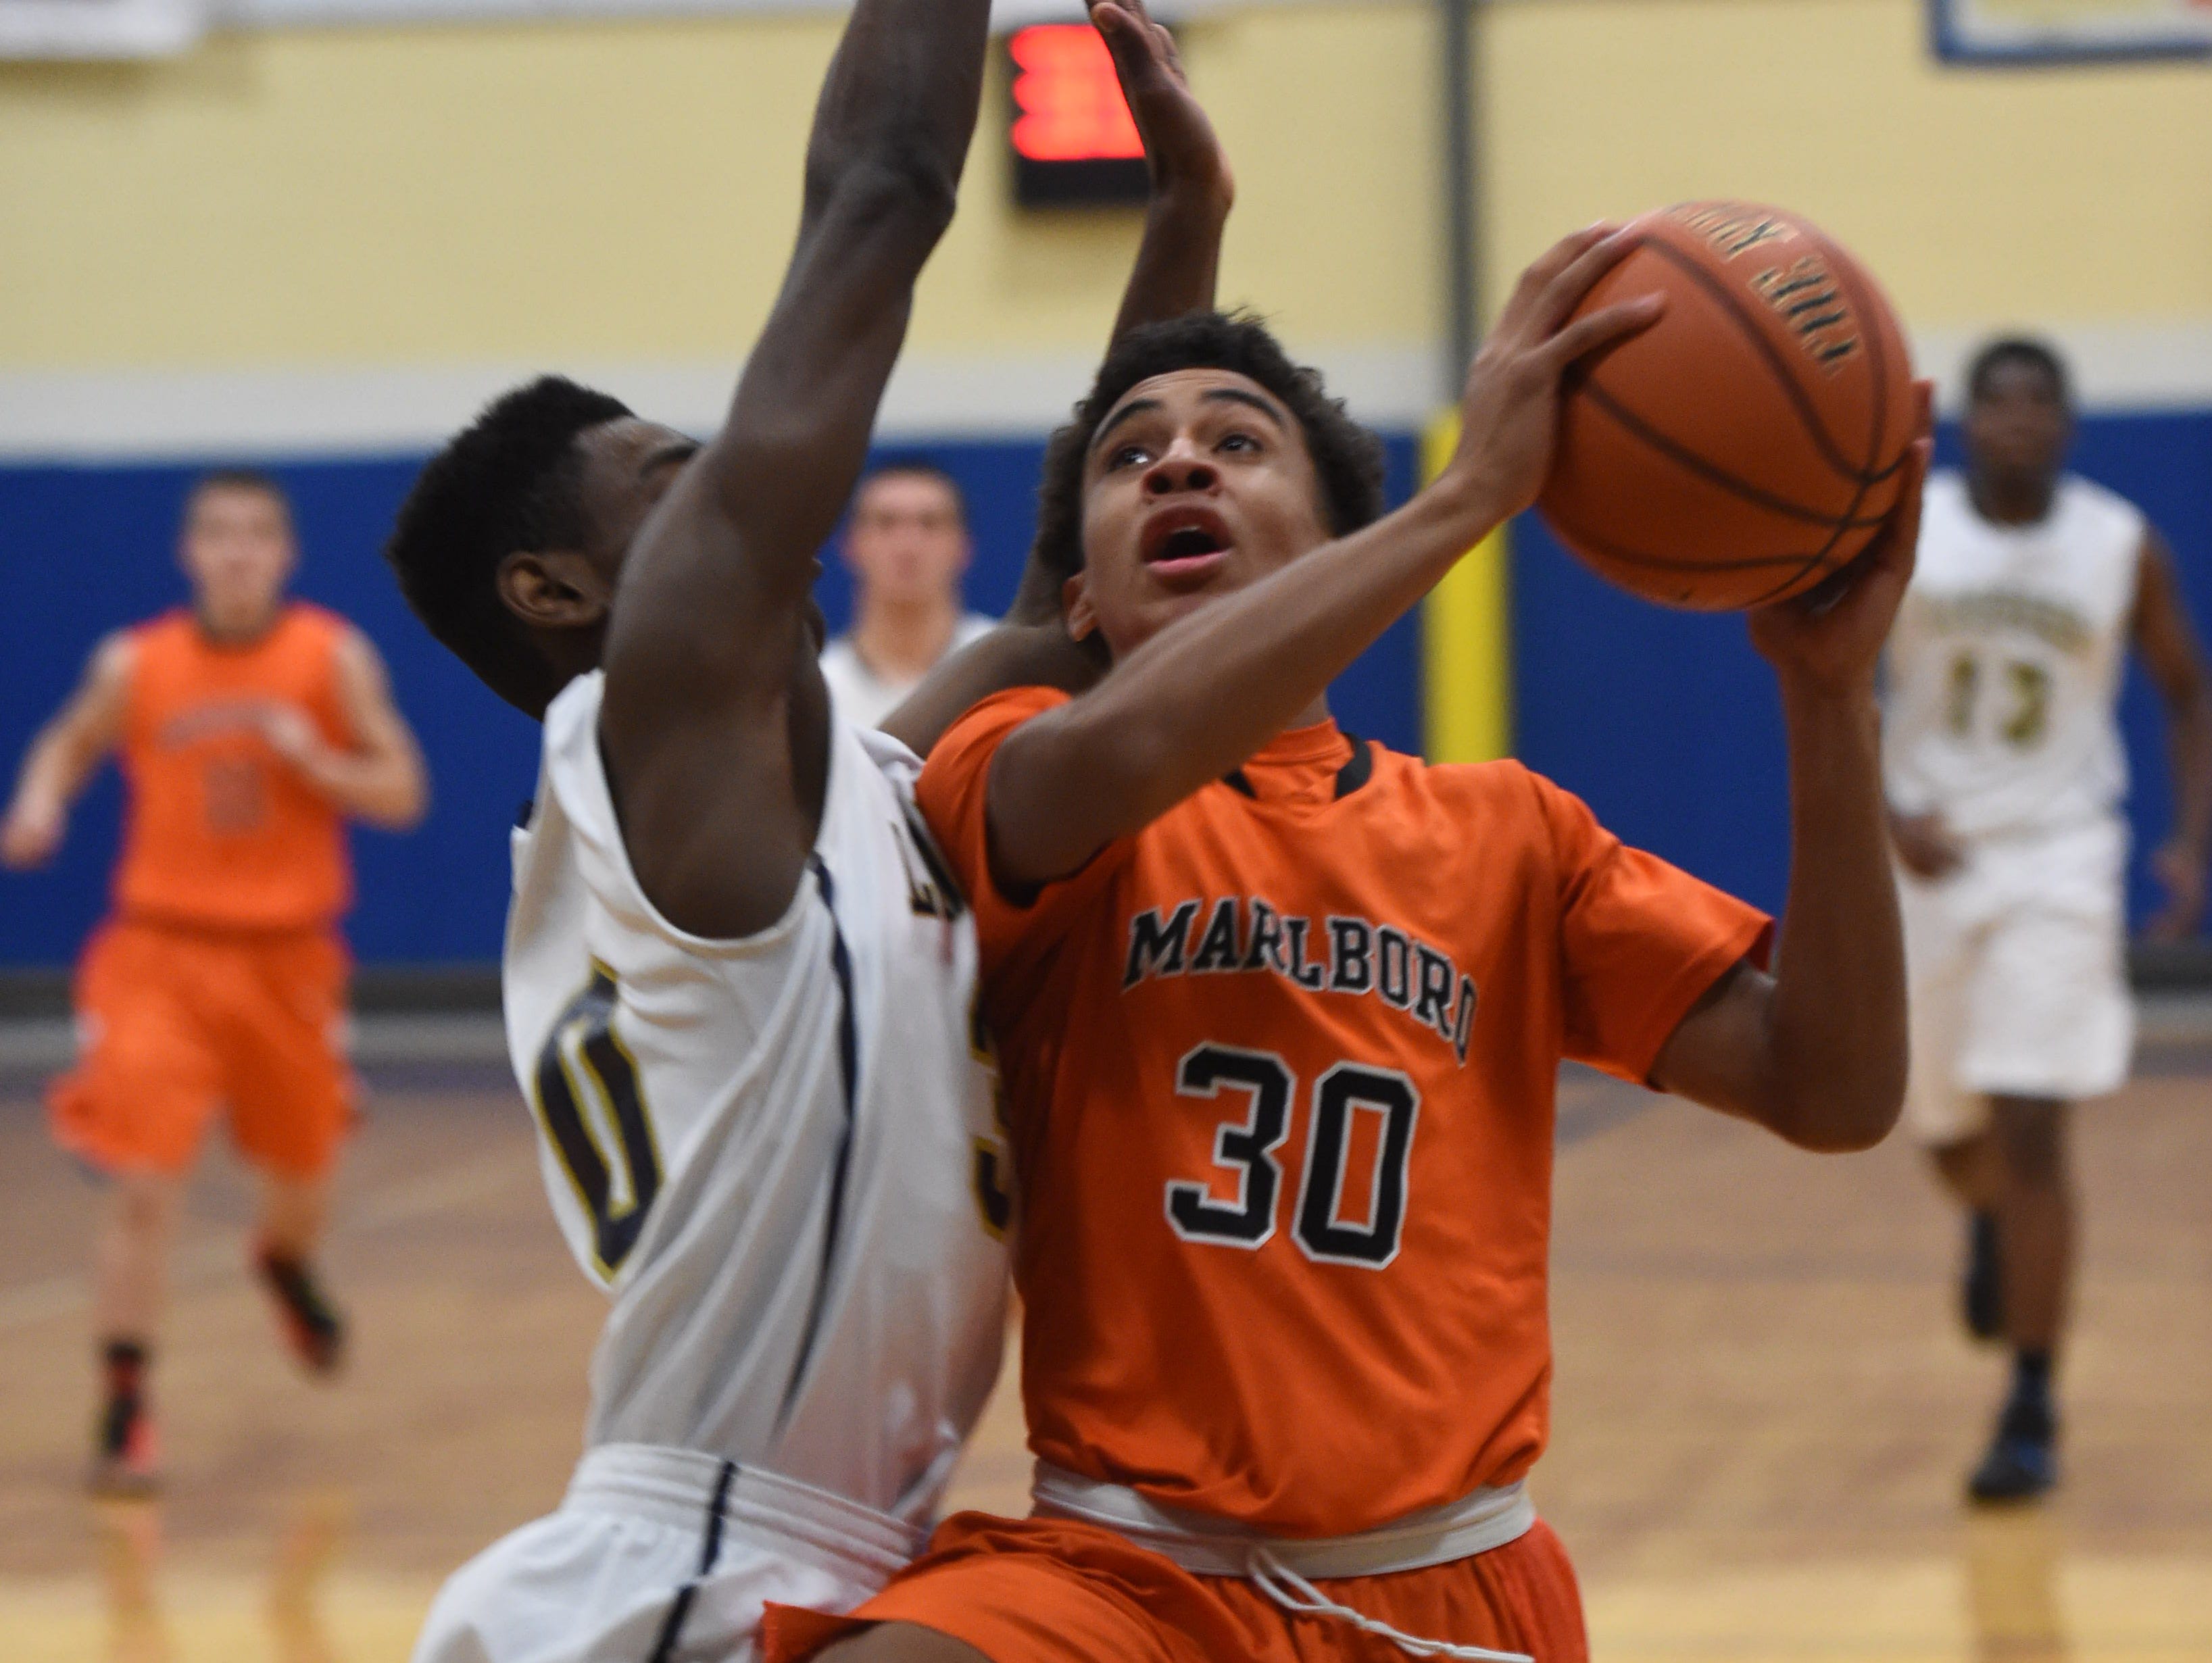 Marlboro High School's Jaiden Allen goes for a layup against Our Lady of Lourdes' Kevin Townes during the Duane Davis Memorial Holiday Tournament last December.